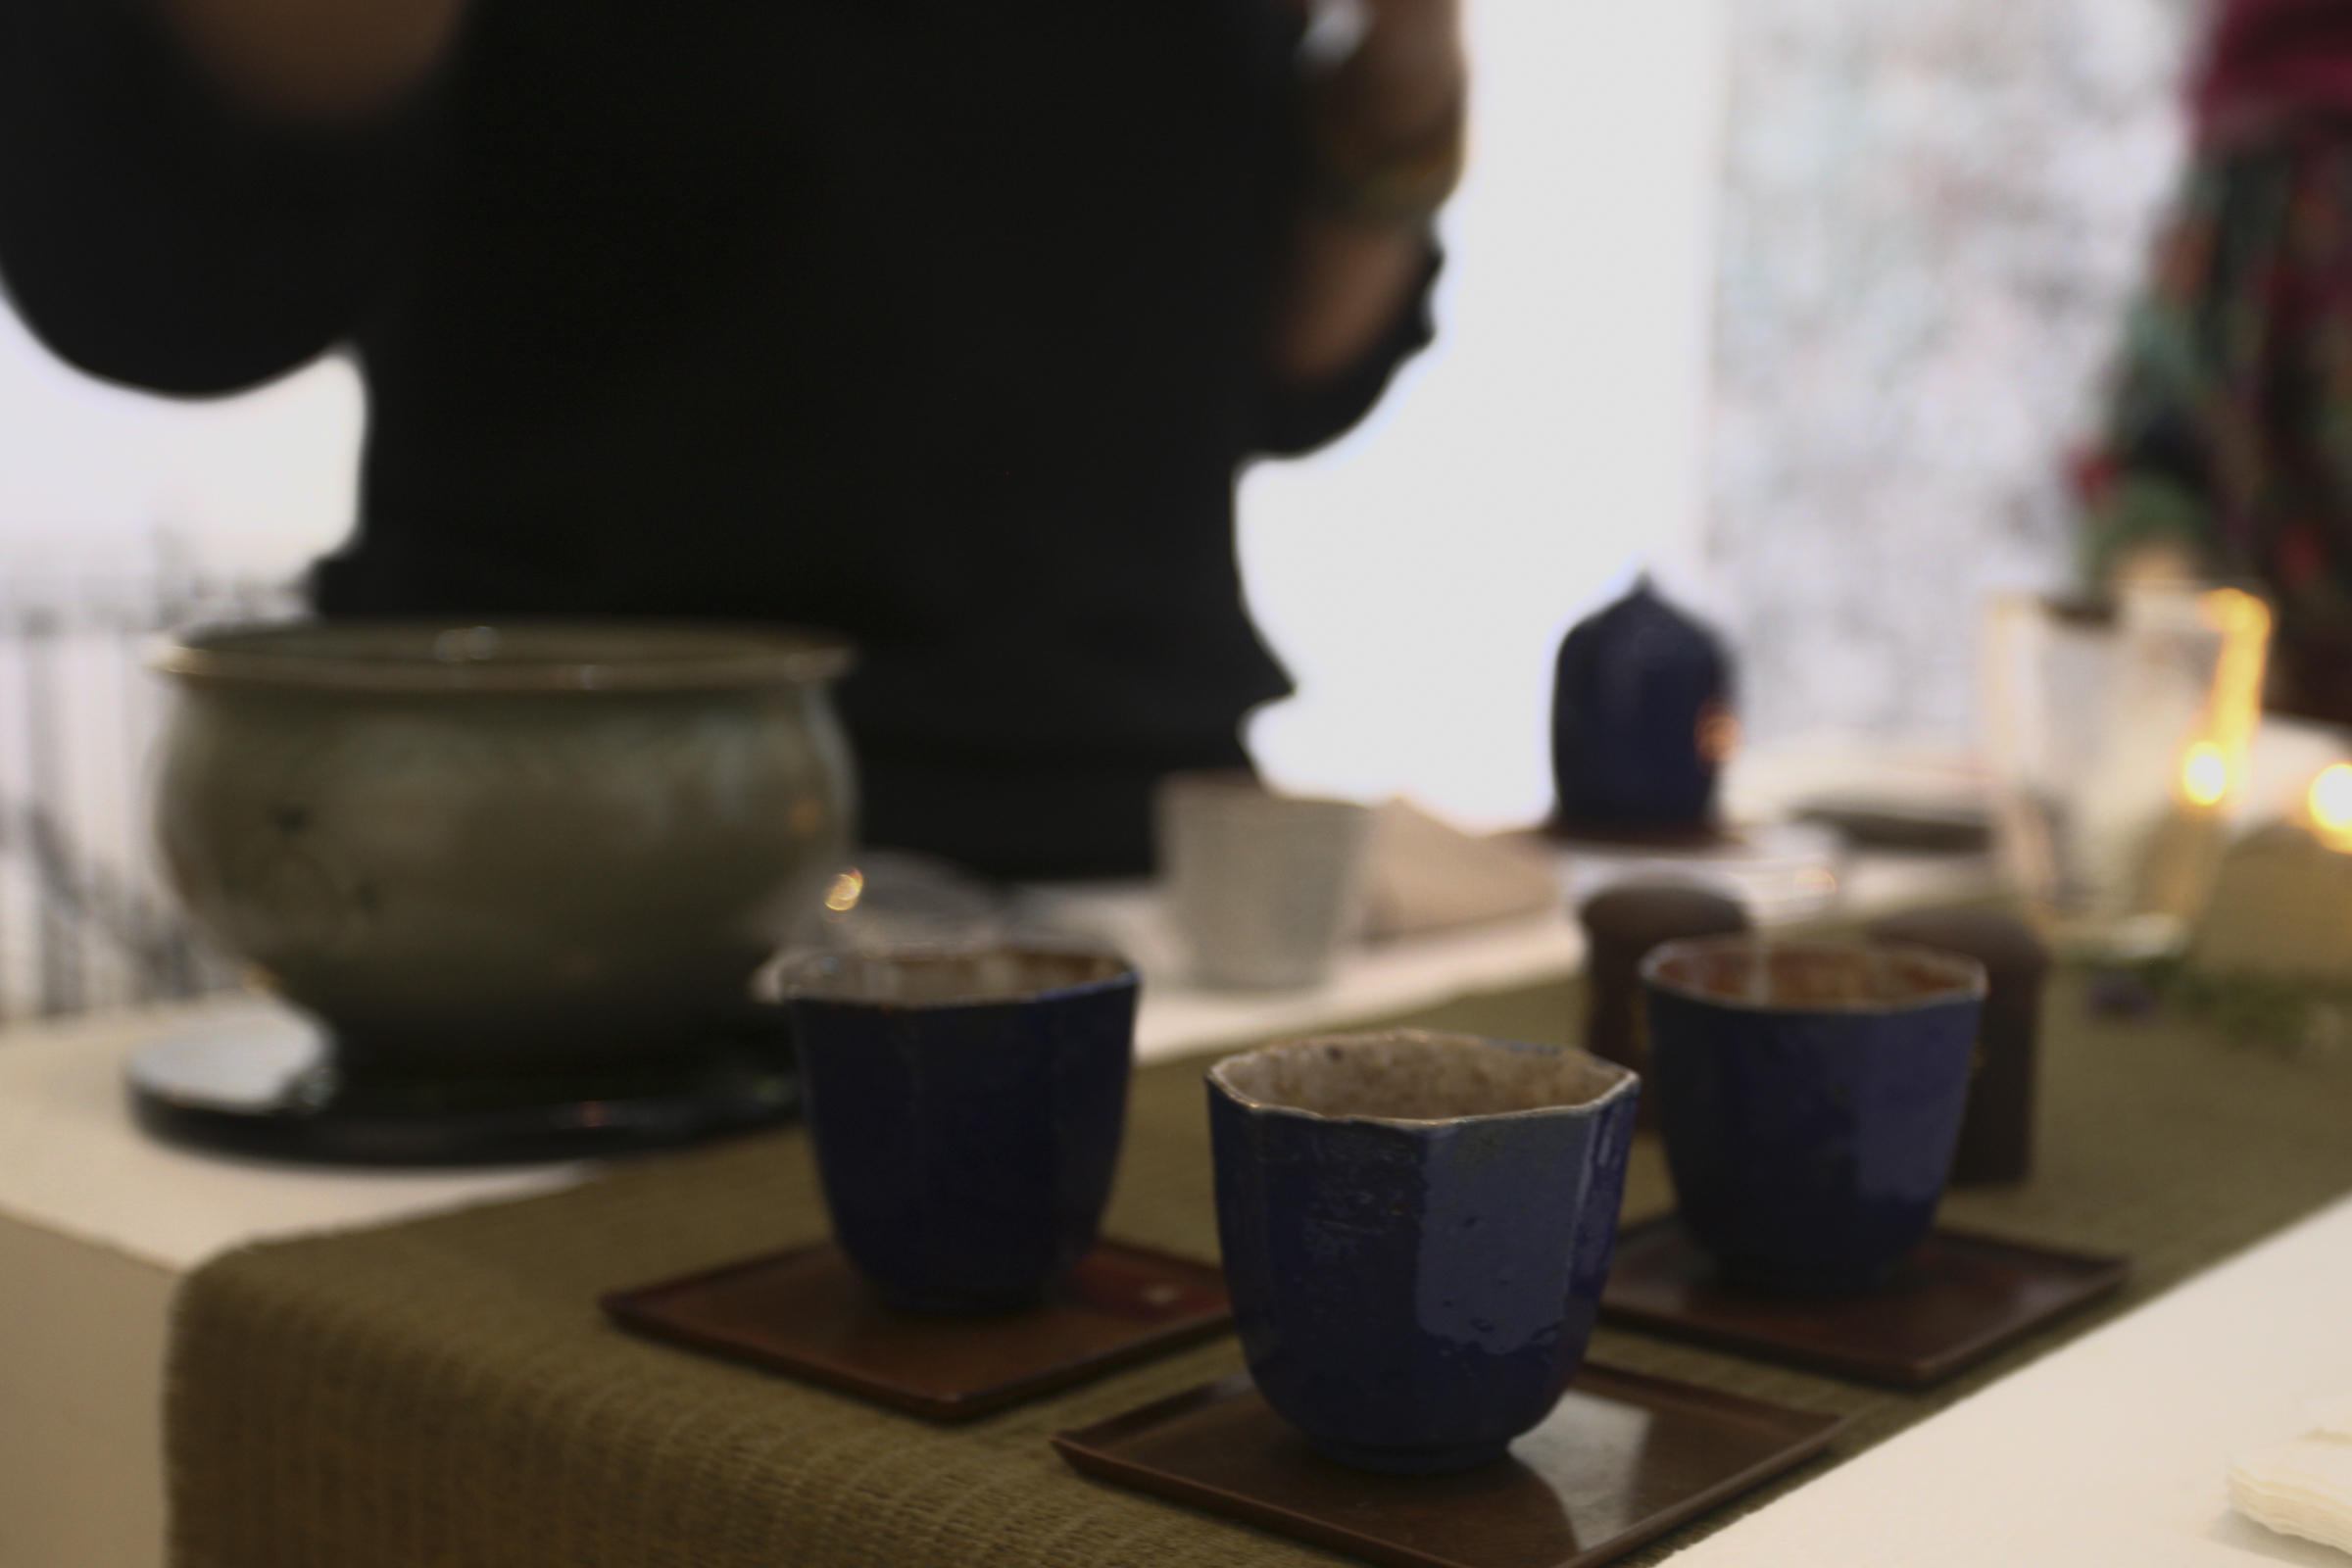   A Way of Life - A Gathering of Tea， photographed by Dodo Xinyu Zhang  